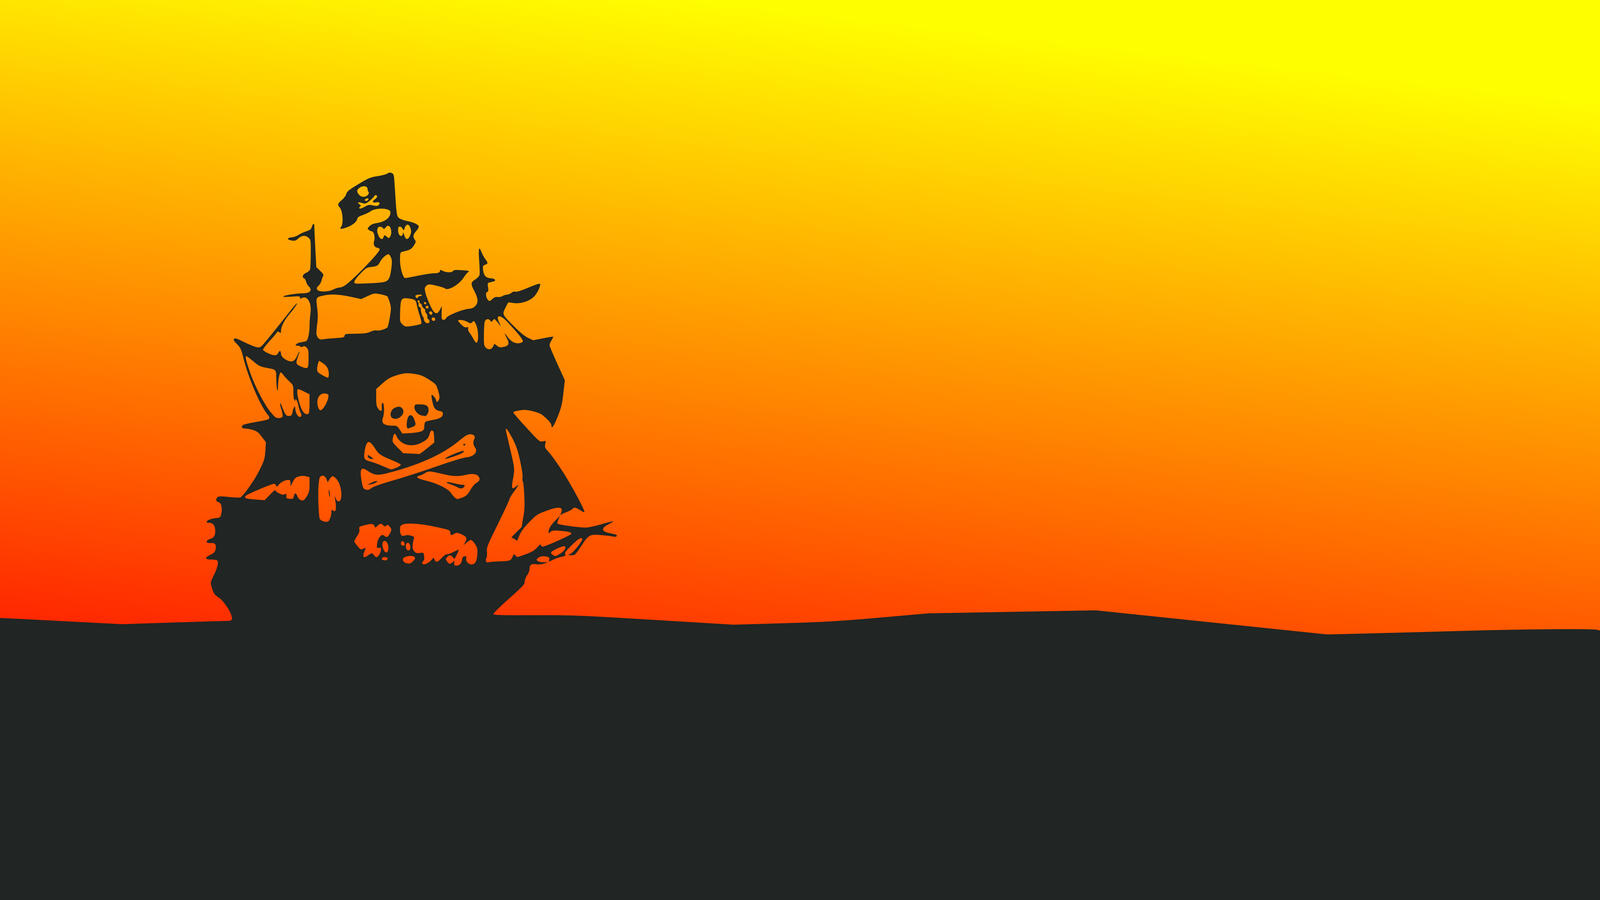 Wallpapers pirate flag ship on the desktop